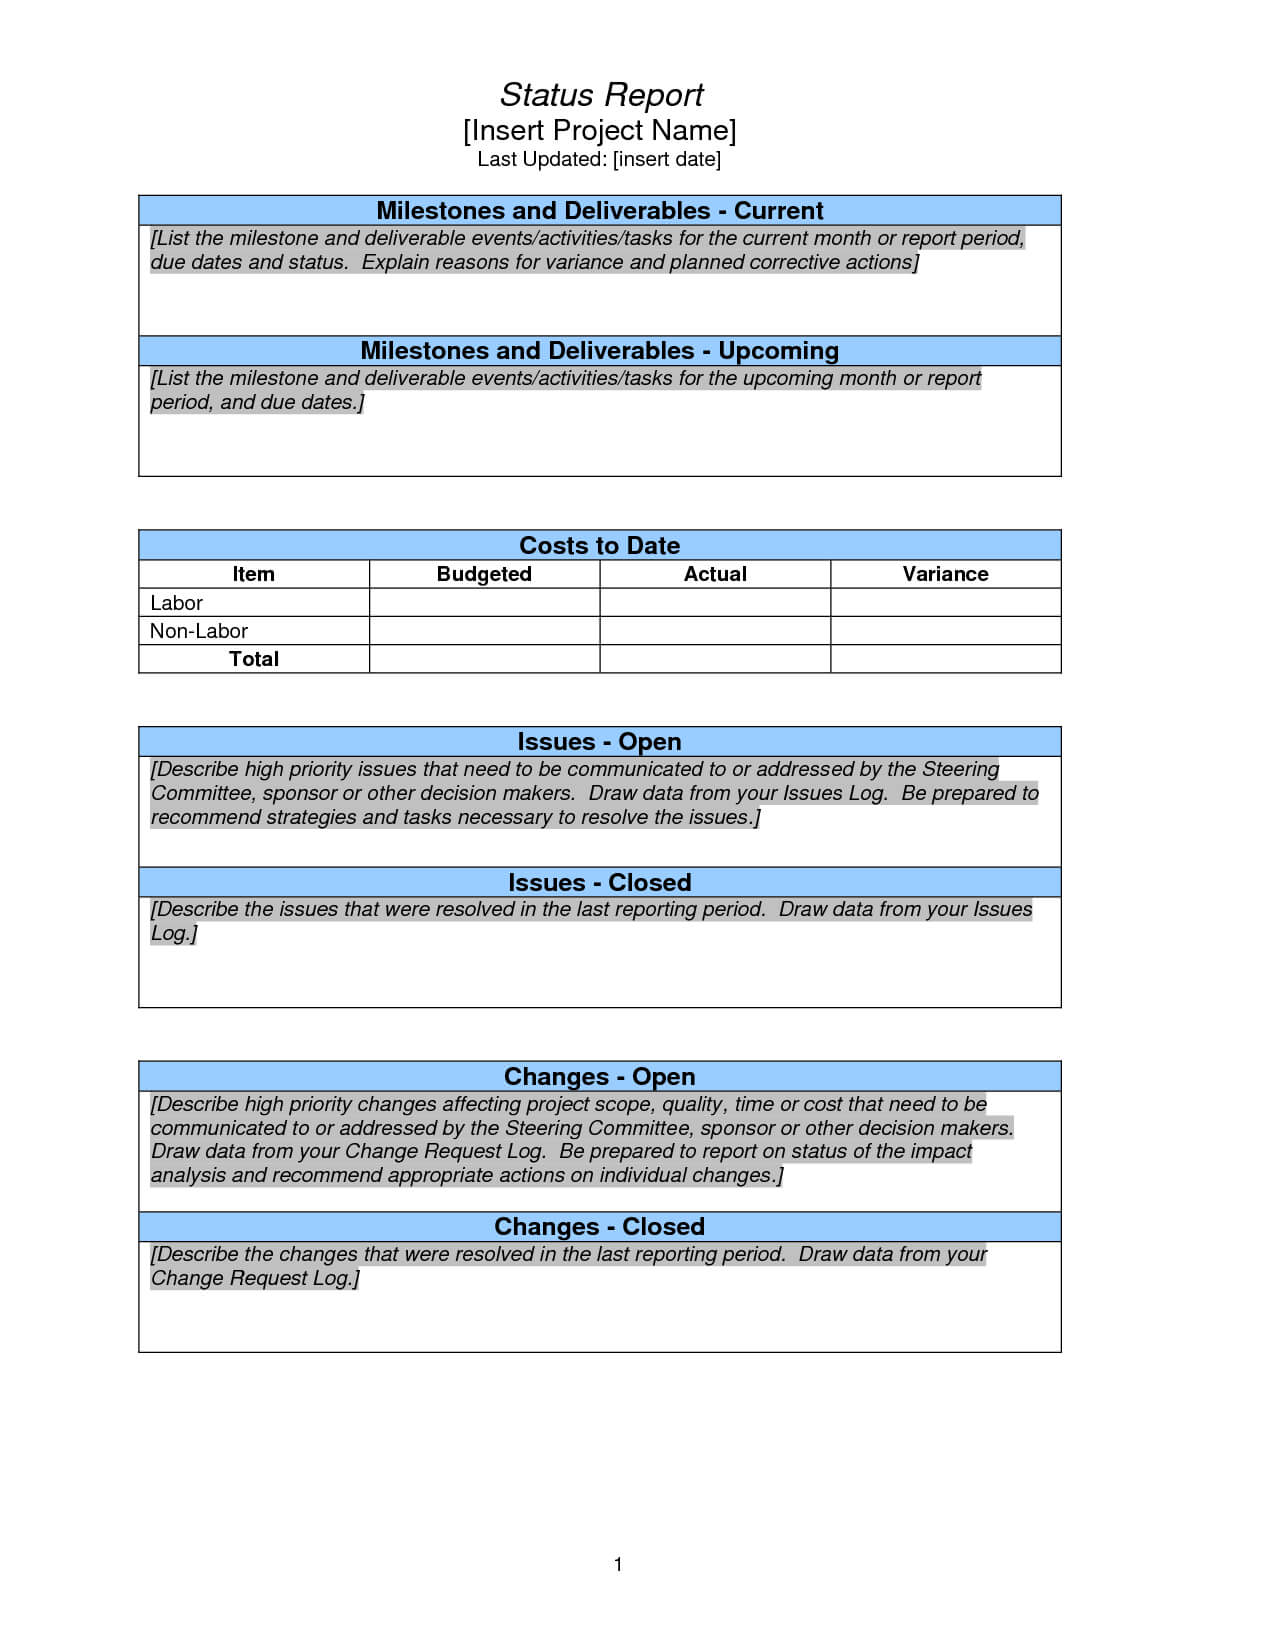 Project Status Report Sample | Project Status Report, Report With Project Management Final Report Template